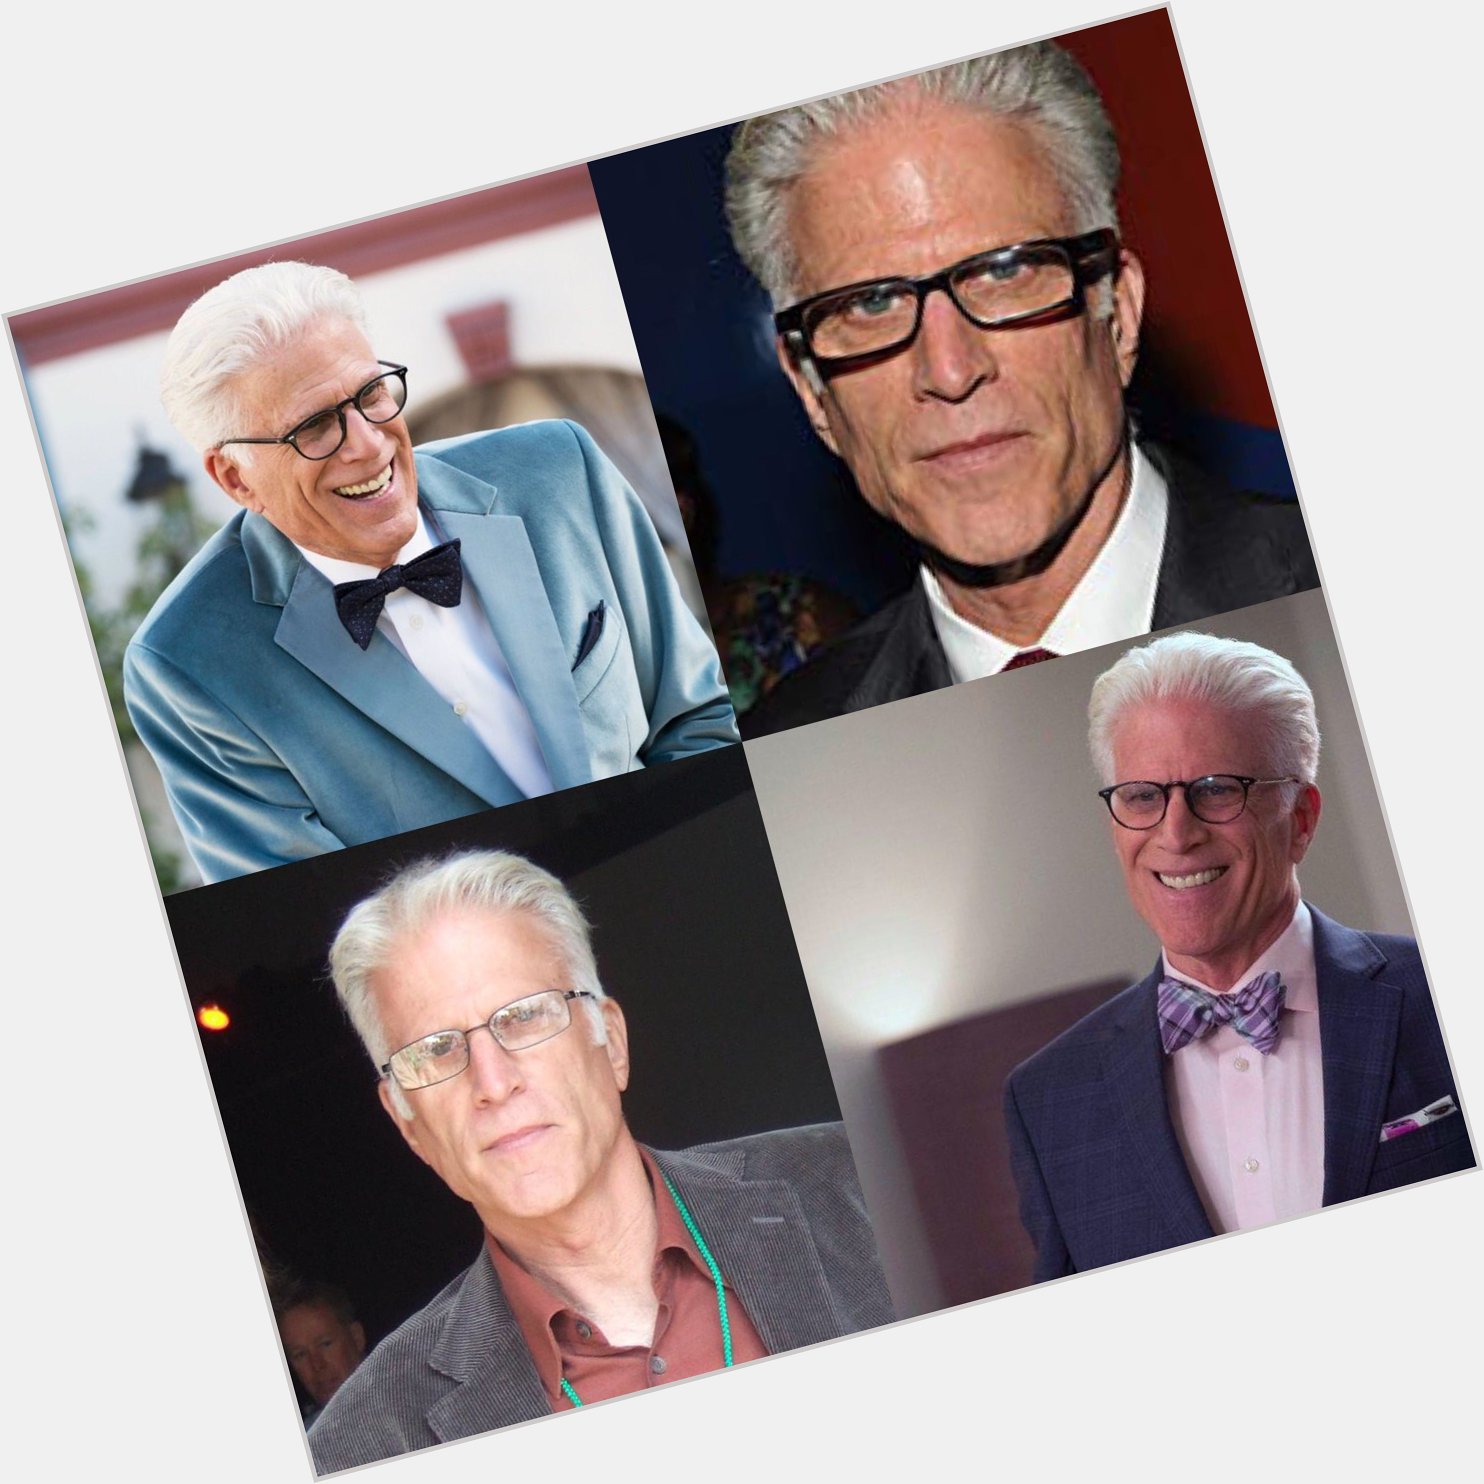 Happy 71 birthday to Ted Danson. Hope that he has a wonderful birthday.       